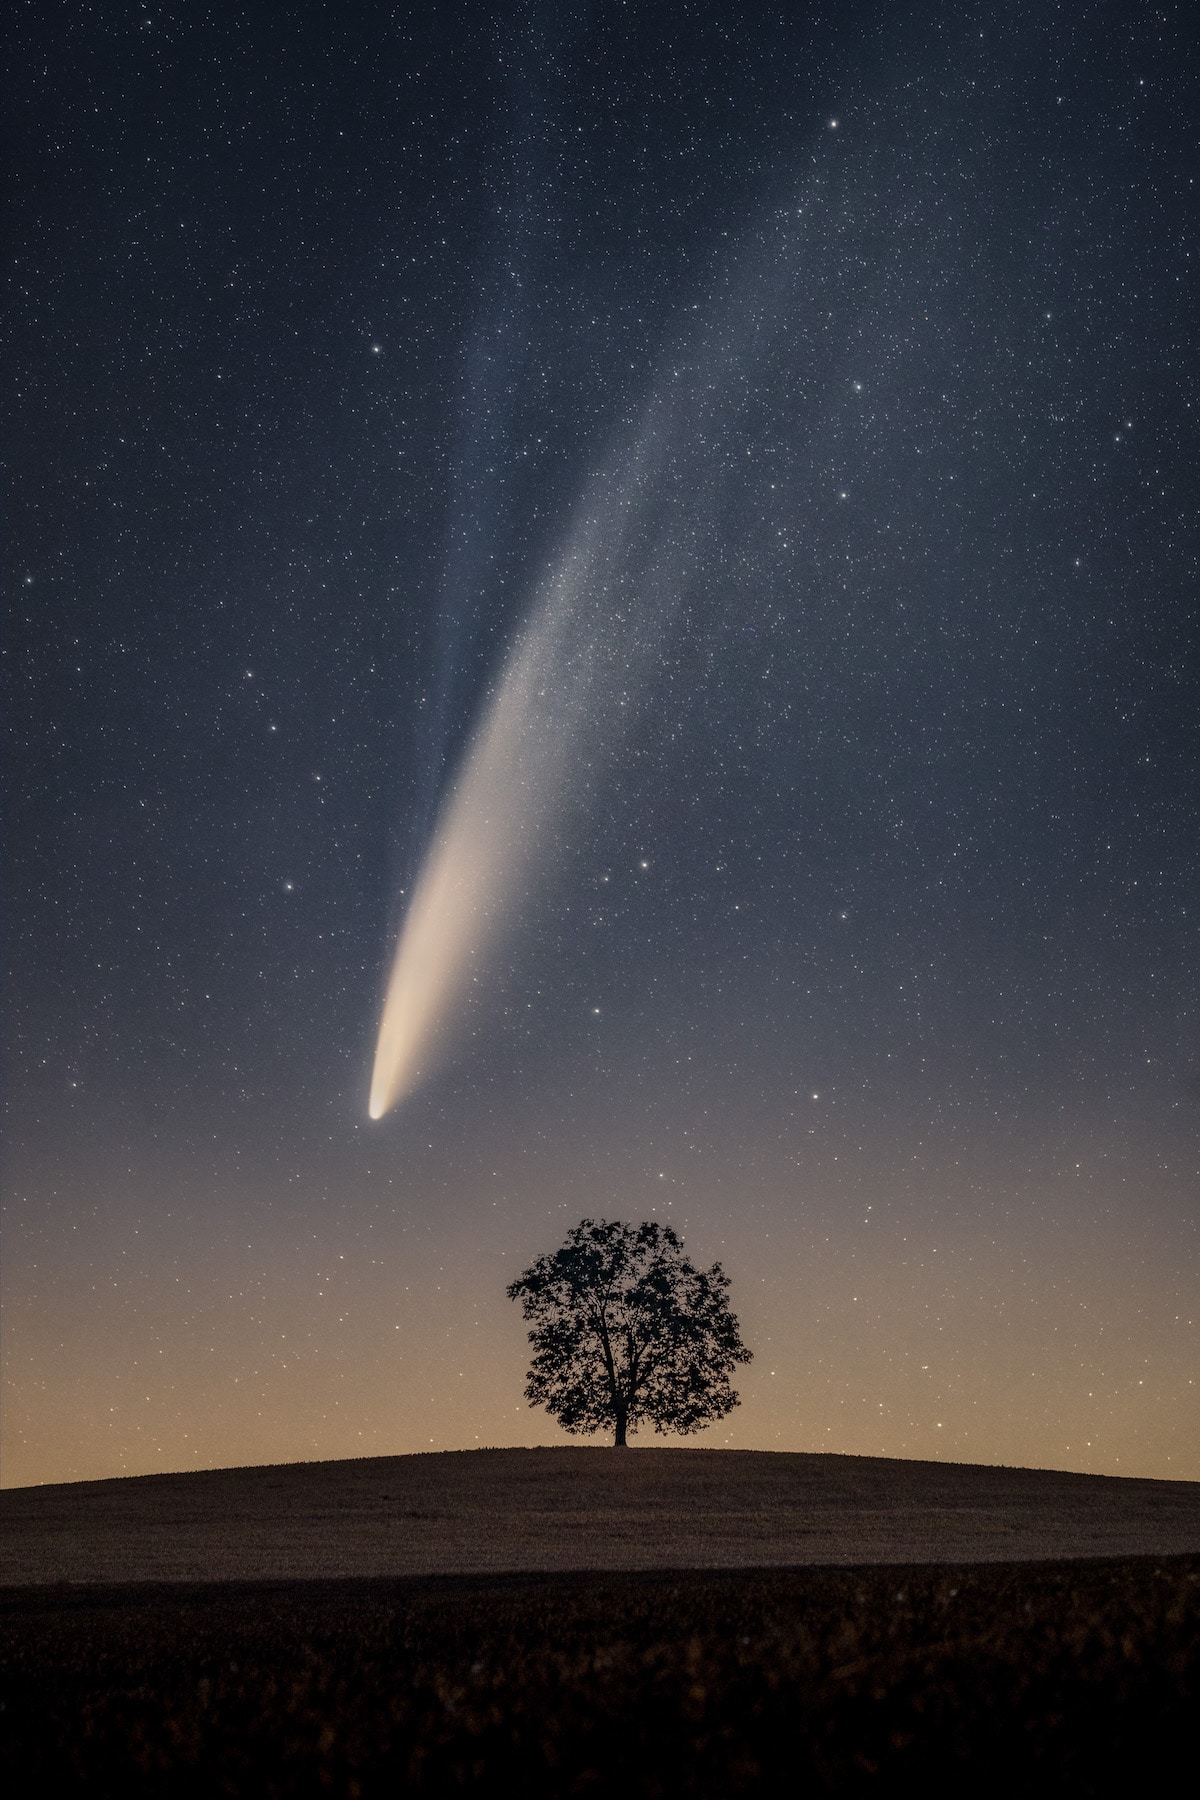 Neowise Comet Falling Over a Tree